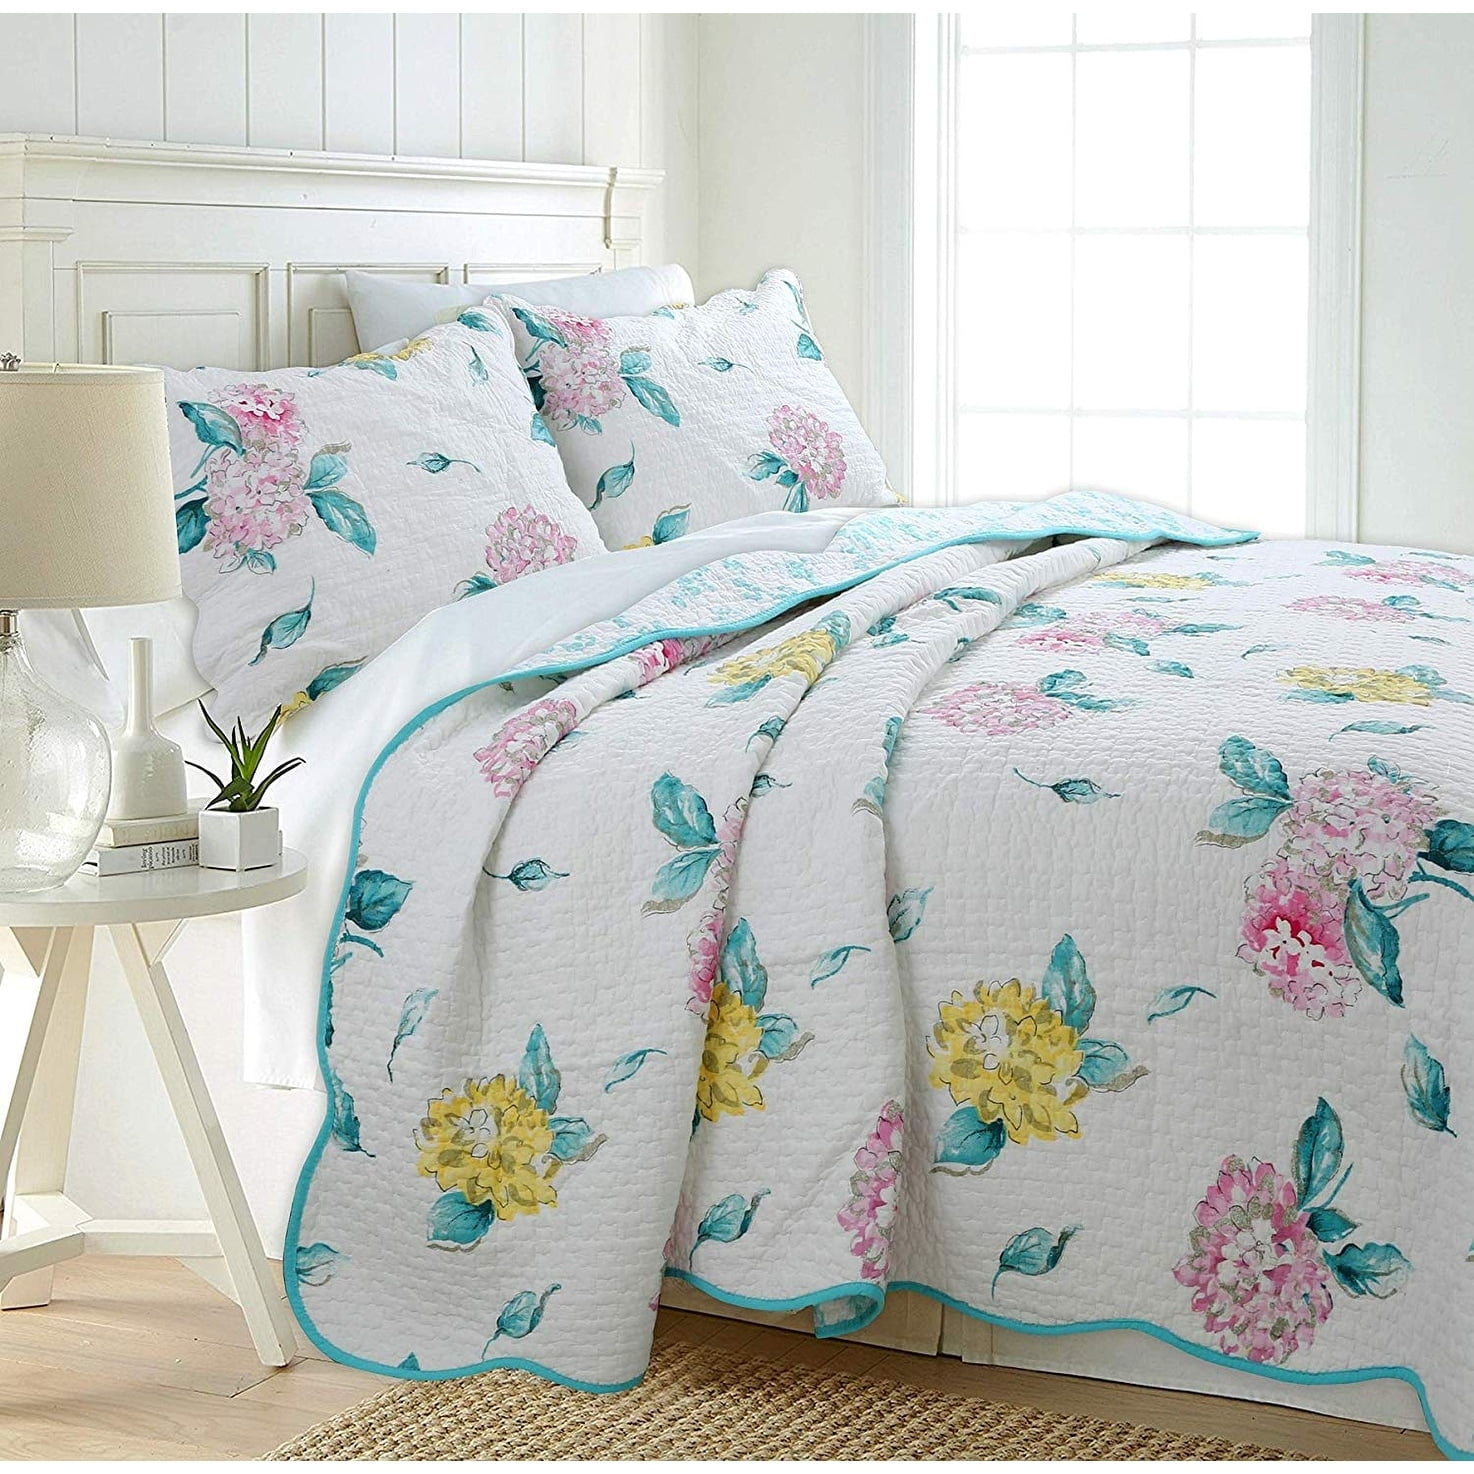 Twin 59x 78,Imagine Sea Flower CH&Q Imagine Sea Flower Printed Quilt Comforter,Cute Cozy Lightweight Cotton Blanket Twin,Soft Warm Throw Blanket for Bed,Couch & Sofa,Bedding Coverlet 